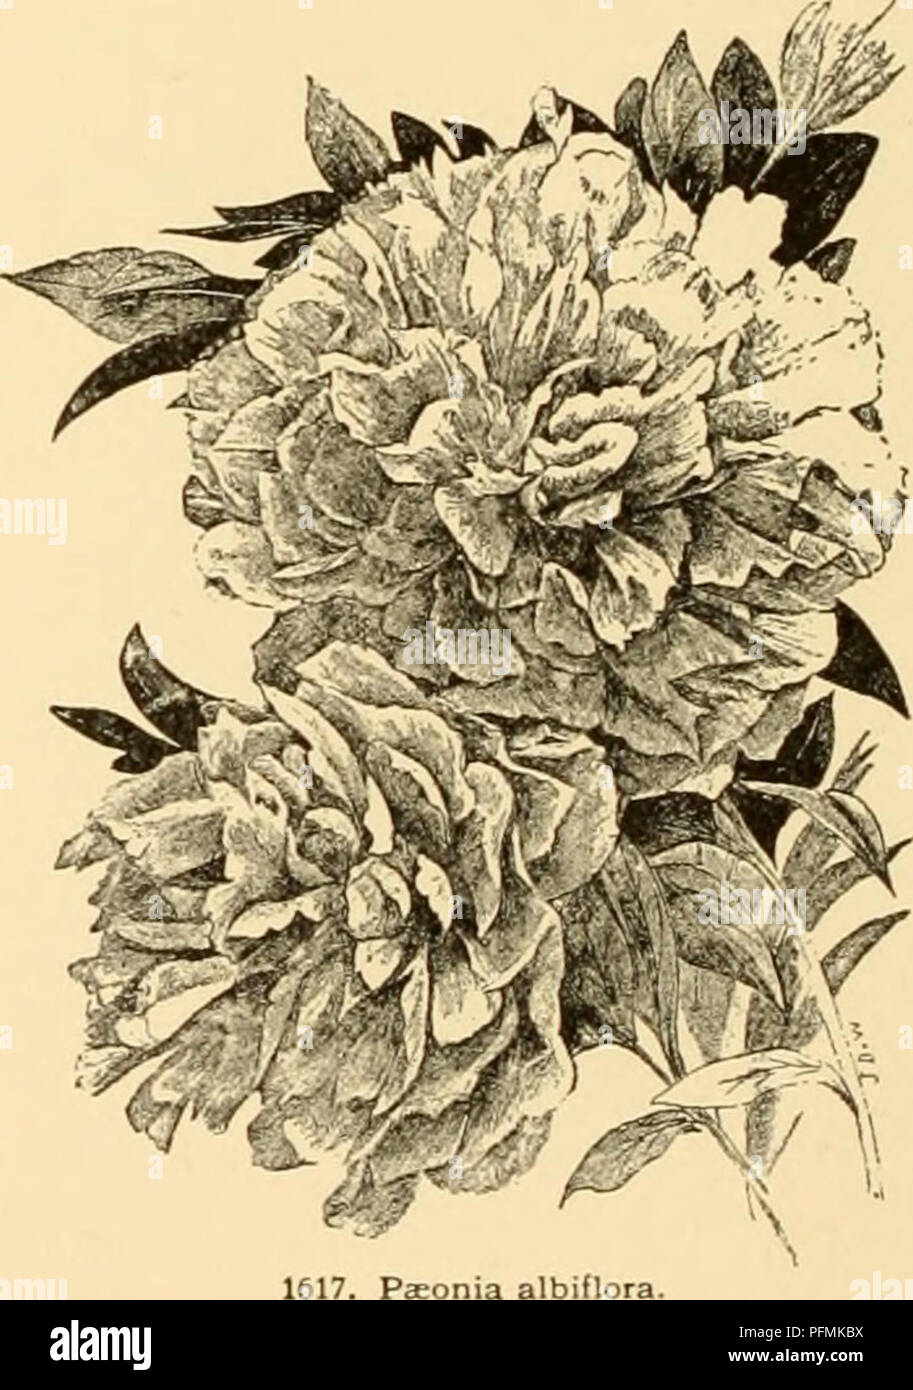 . Cyclopedia of American horticulture : comprising suggestions for cultivation of horticultural plants, descriptions of the species of fruits, vegetables, flowers, and ornamental plants sold in the United States and Canada, together with geographical and biographical sketches. Gardening; Horticulture; Horticulture; Horticulture. INDEX. alba-plena, 6. Double Anemone- Old Double Flesh- albiflora, 3. fld. Red. 6. White, 6. amaranthescens, 8. Double Anemone- Otto Froebel, 6. Andersonii, 10. fld. Rose, 6. PallasU, 7, anemoneflora, 6. edxdis, 3. papaveraeea, 1. anomala, 5. elatior, 7. paradoxa, 9. a Stock Photo